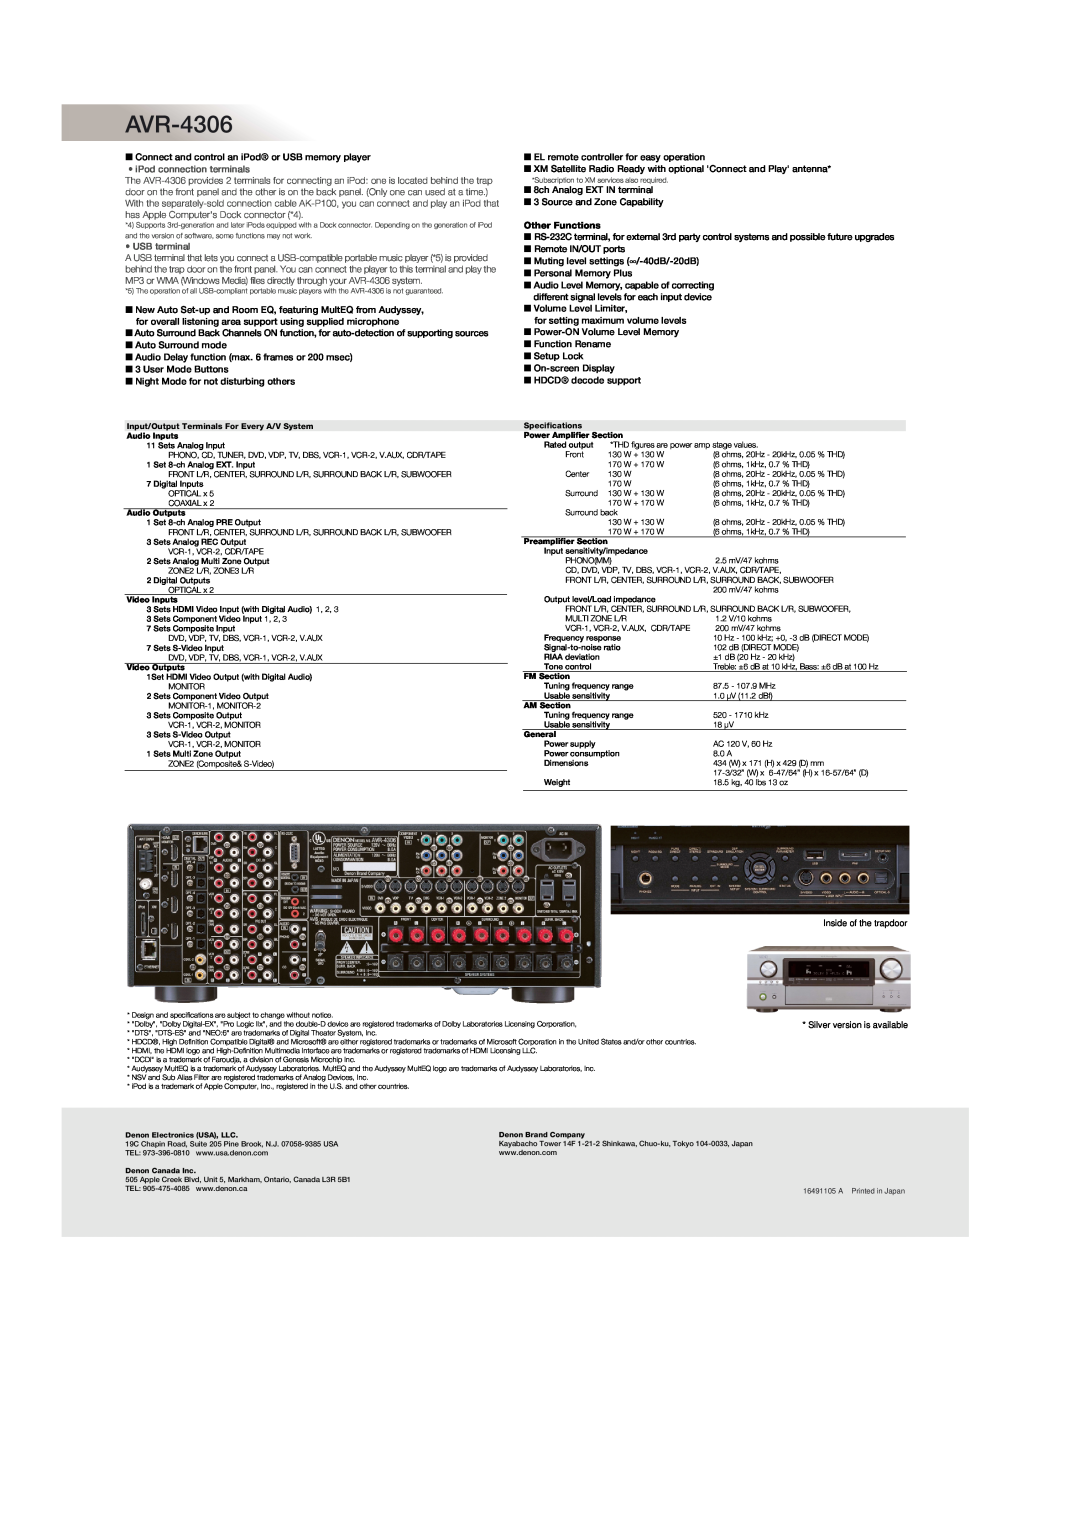 Denon AVR-4306 manual Other Functions 